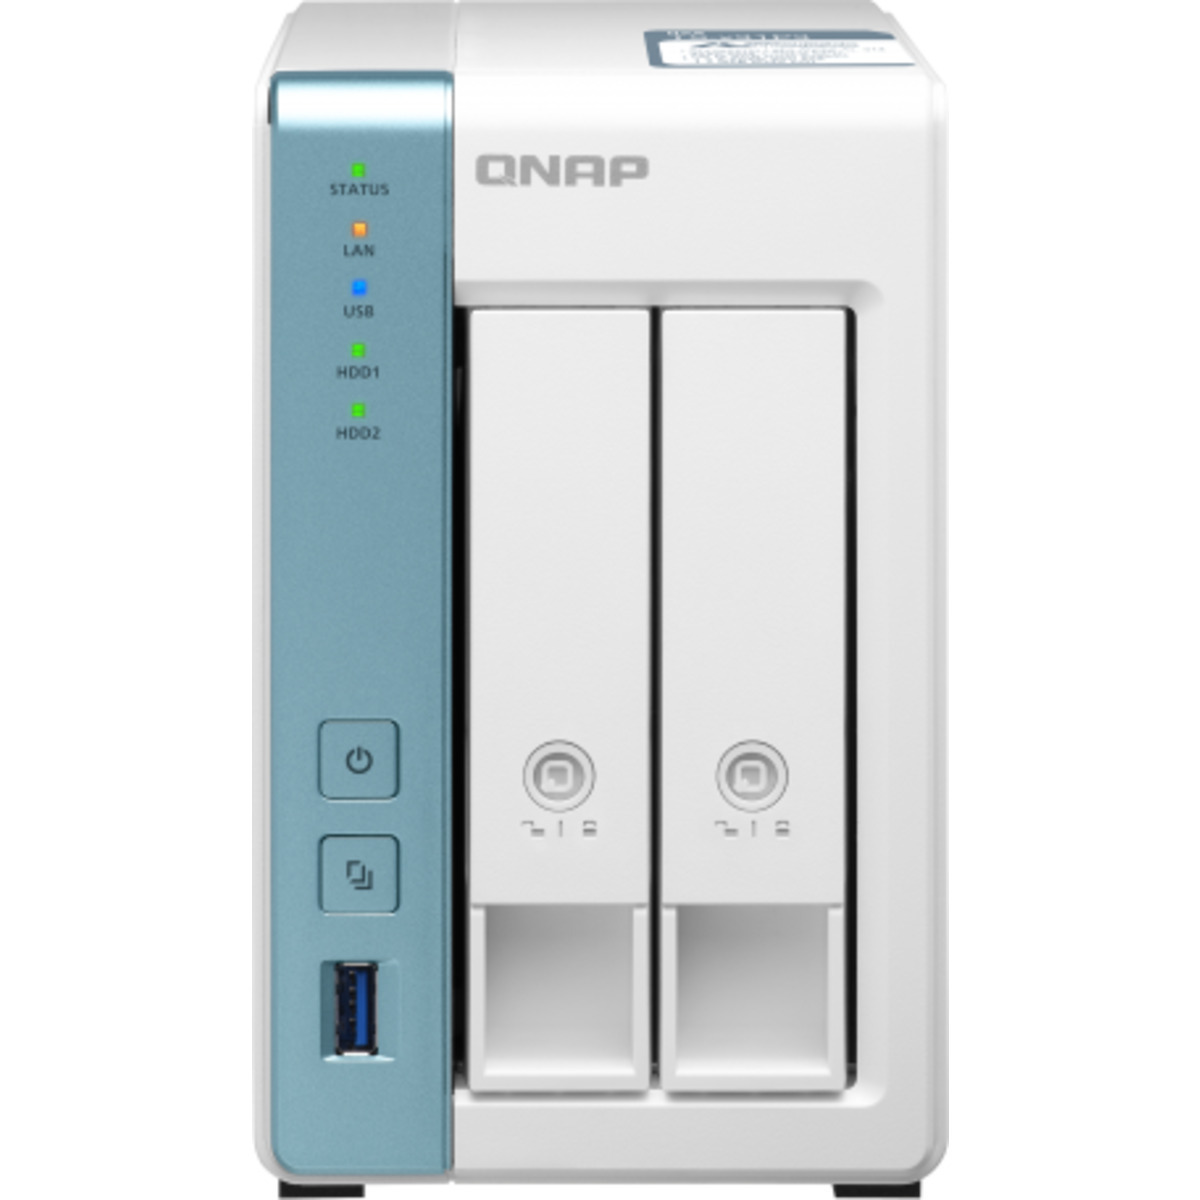 QNAP TS-231P3 NAS - Network Attached Storage Device Burn-In Tested Configurations - FREE RAM UPGRADE